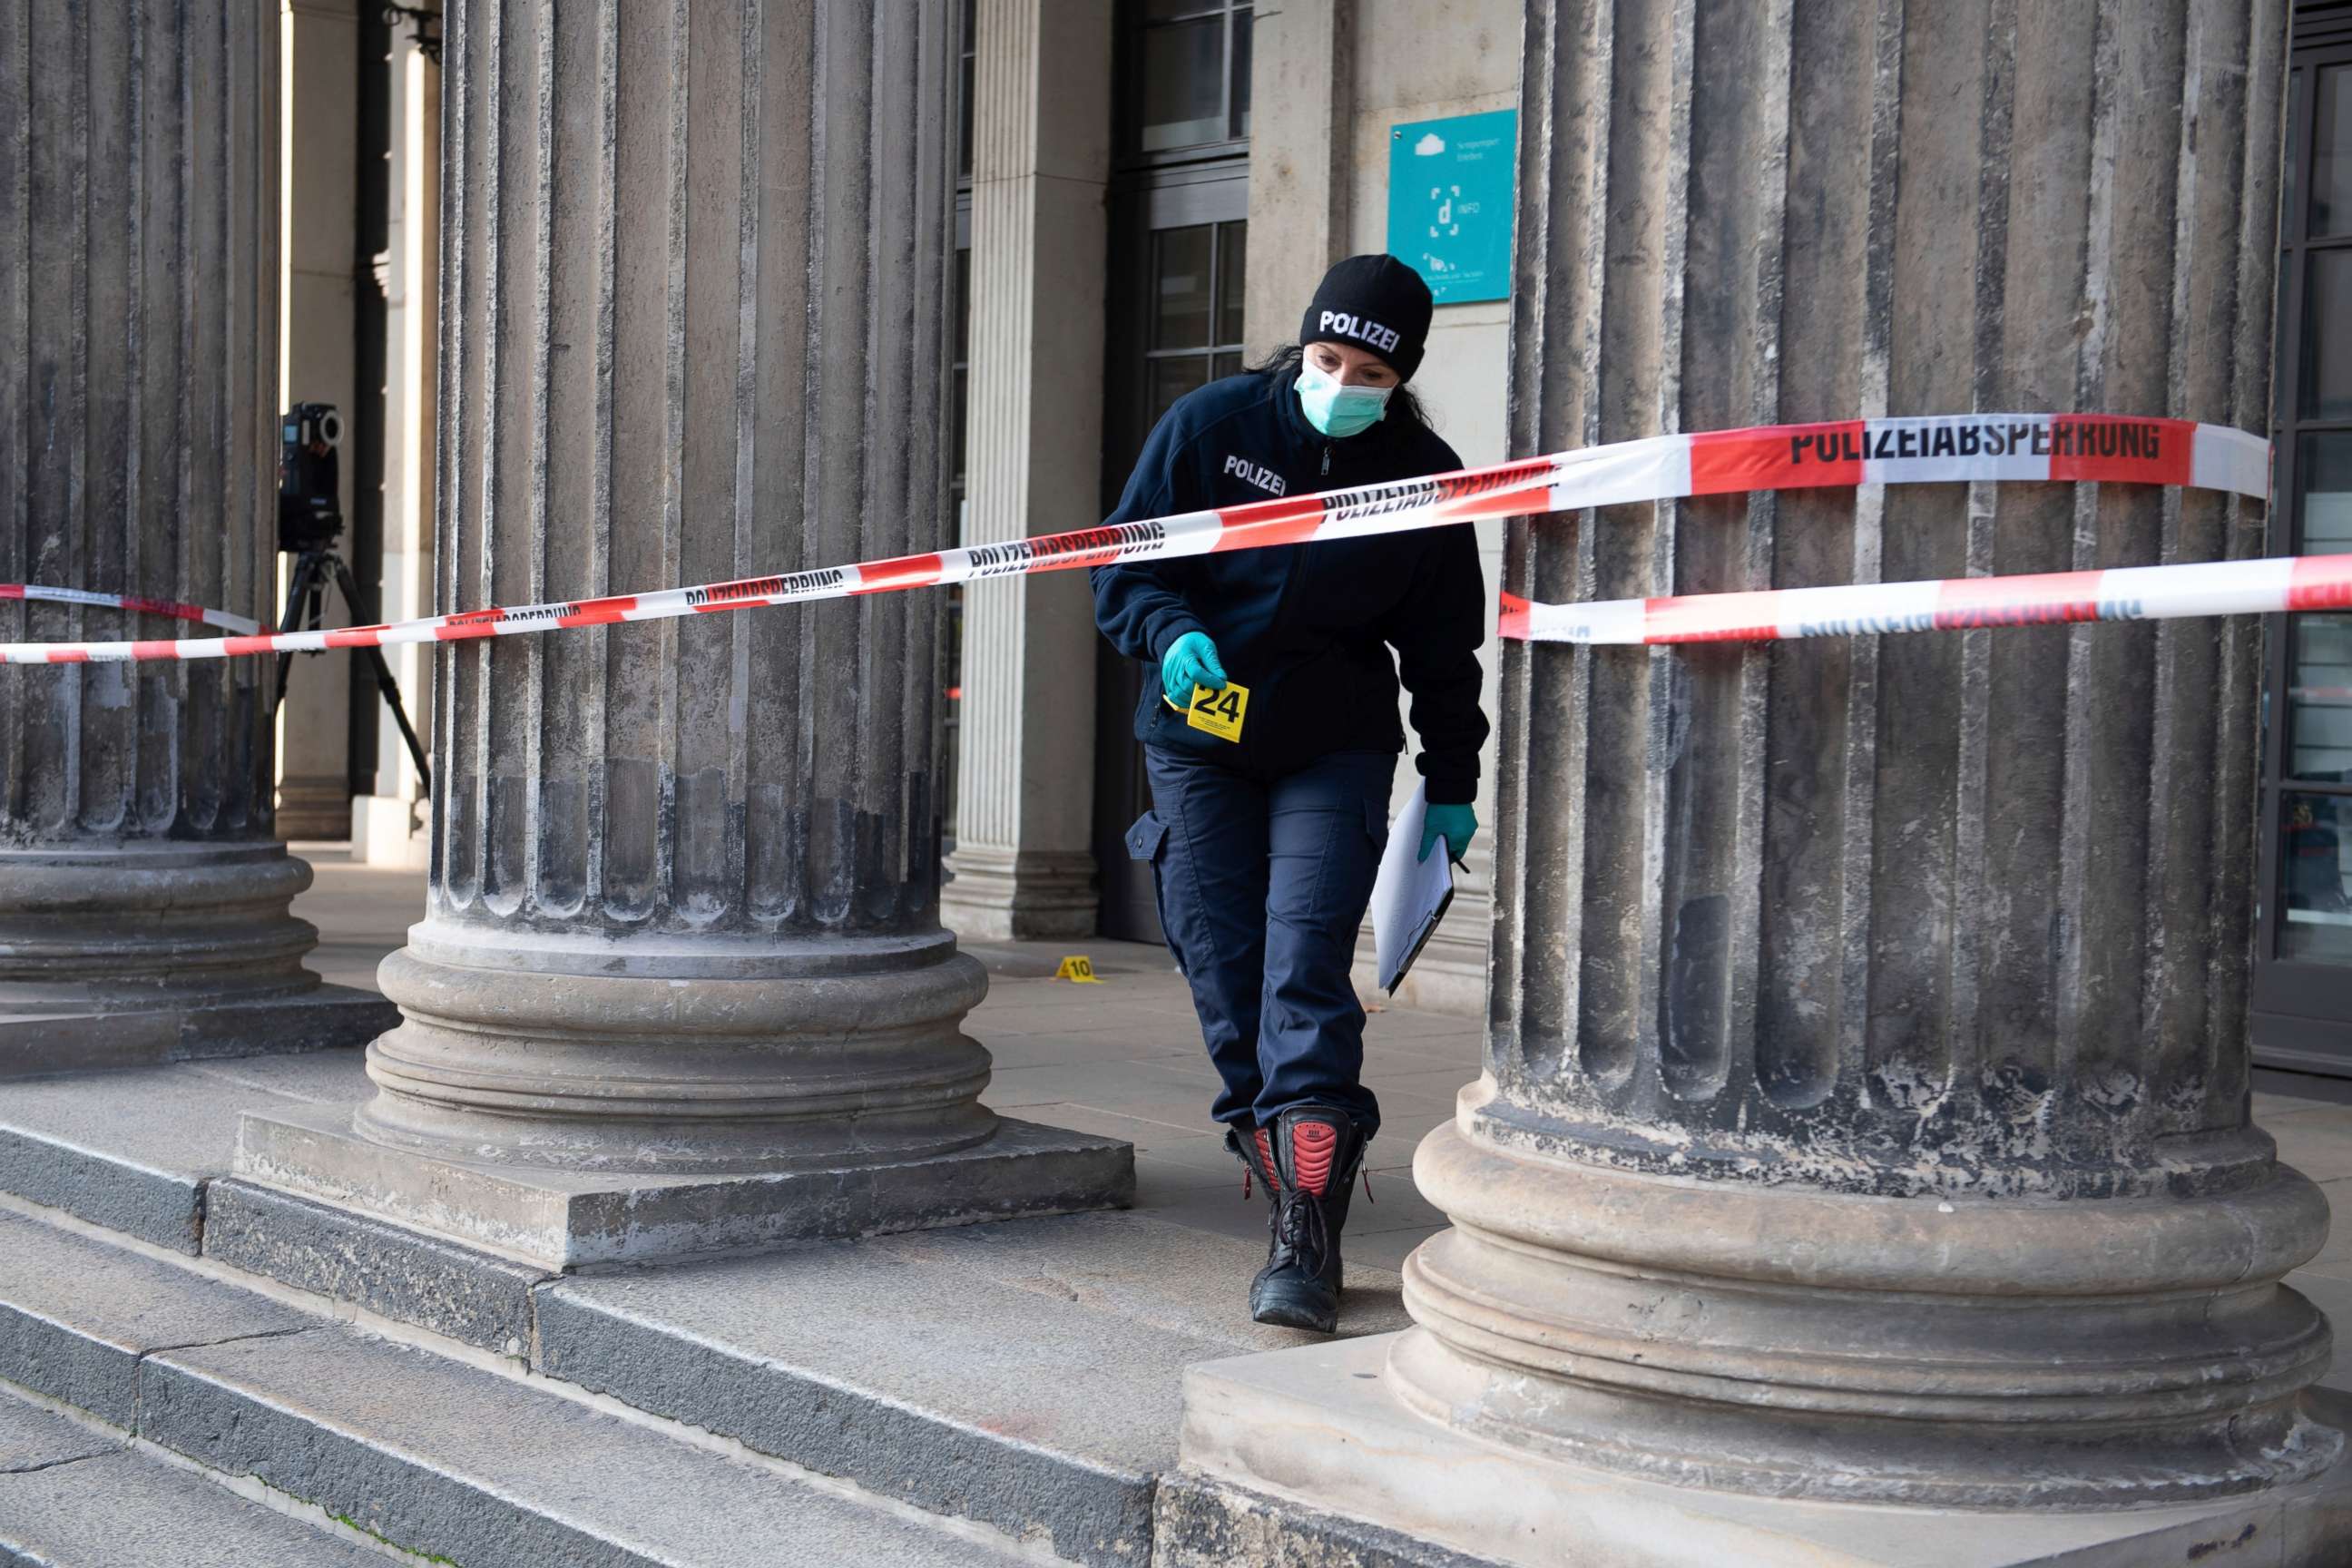 PHOTO: A police officer walks behind a caution tape at the Schinkelwache building in Dresden Monday, Nov. 25, 2019. Authorities in Germany say thieves have carried out a brazen heist at Dresden's Green Vault. (Sebastian Kahnert/dpa via AP)